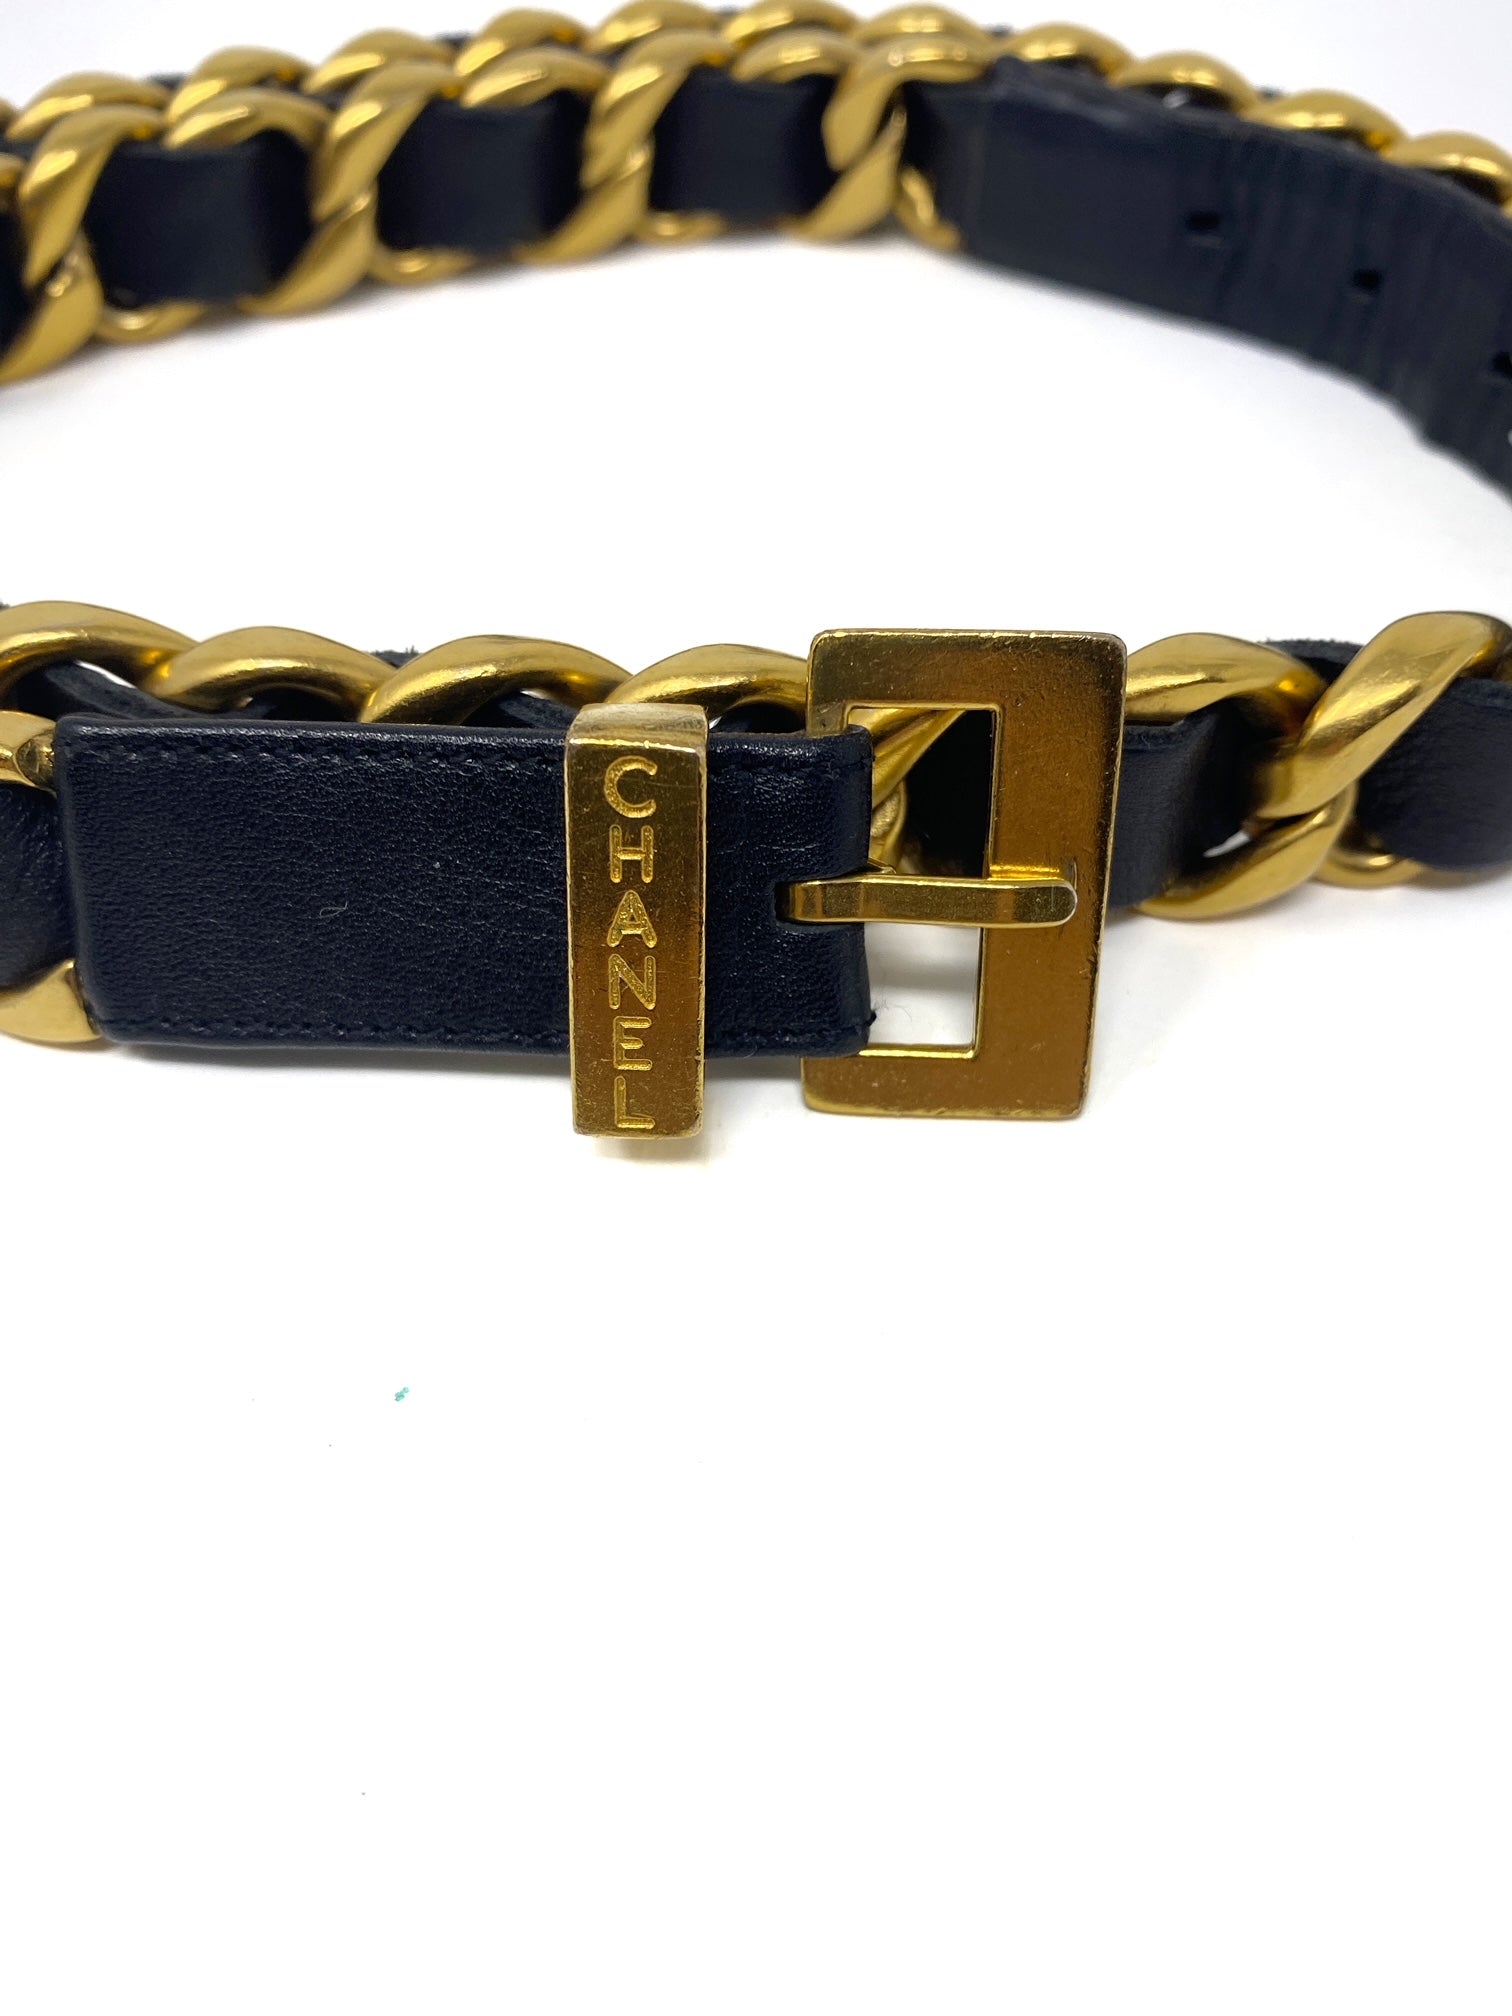 chanel gold chain belt, with black leather and buckle; 85cm